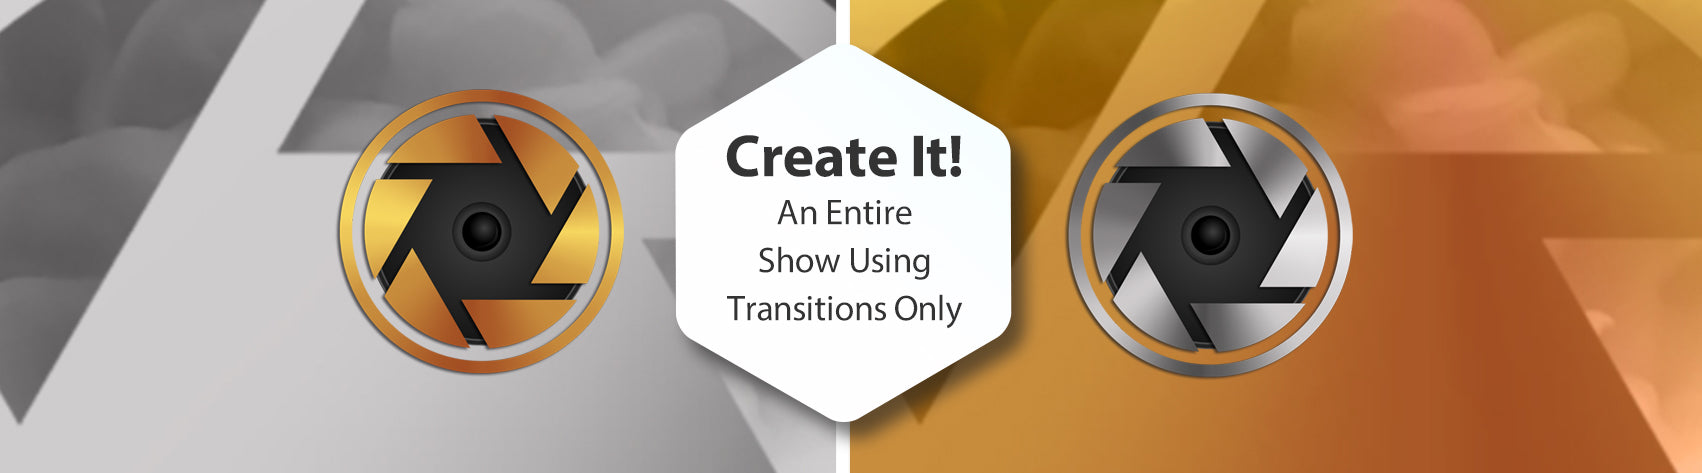 Create It! An Entire Show Using Transitions Only